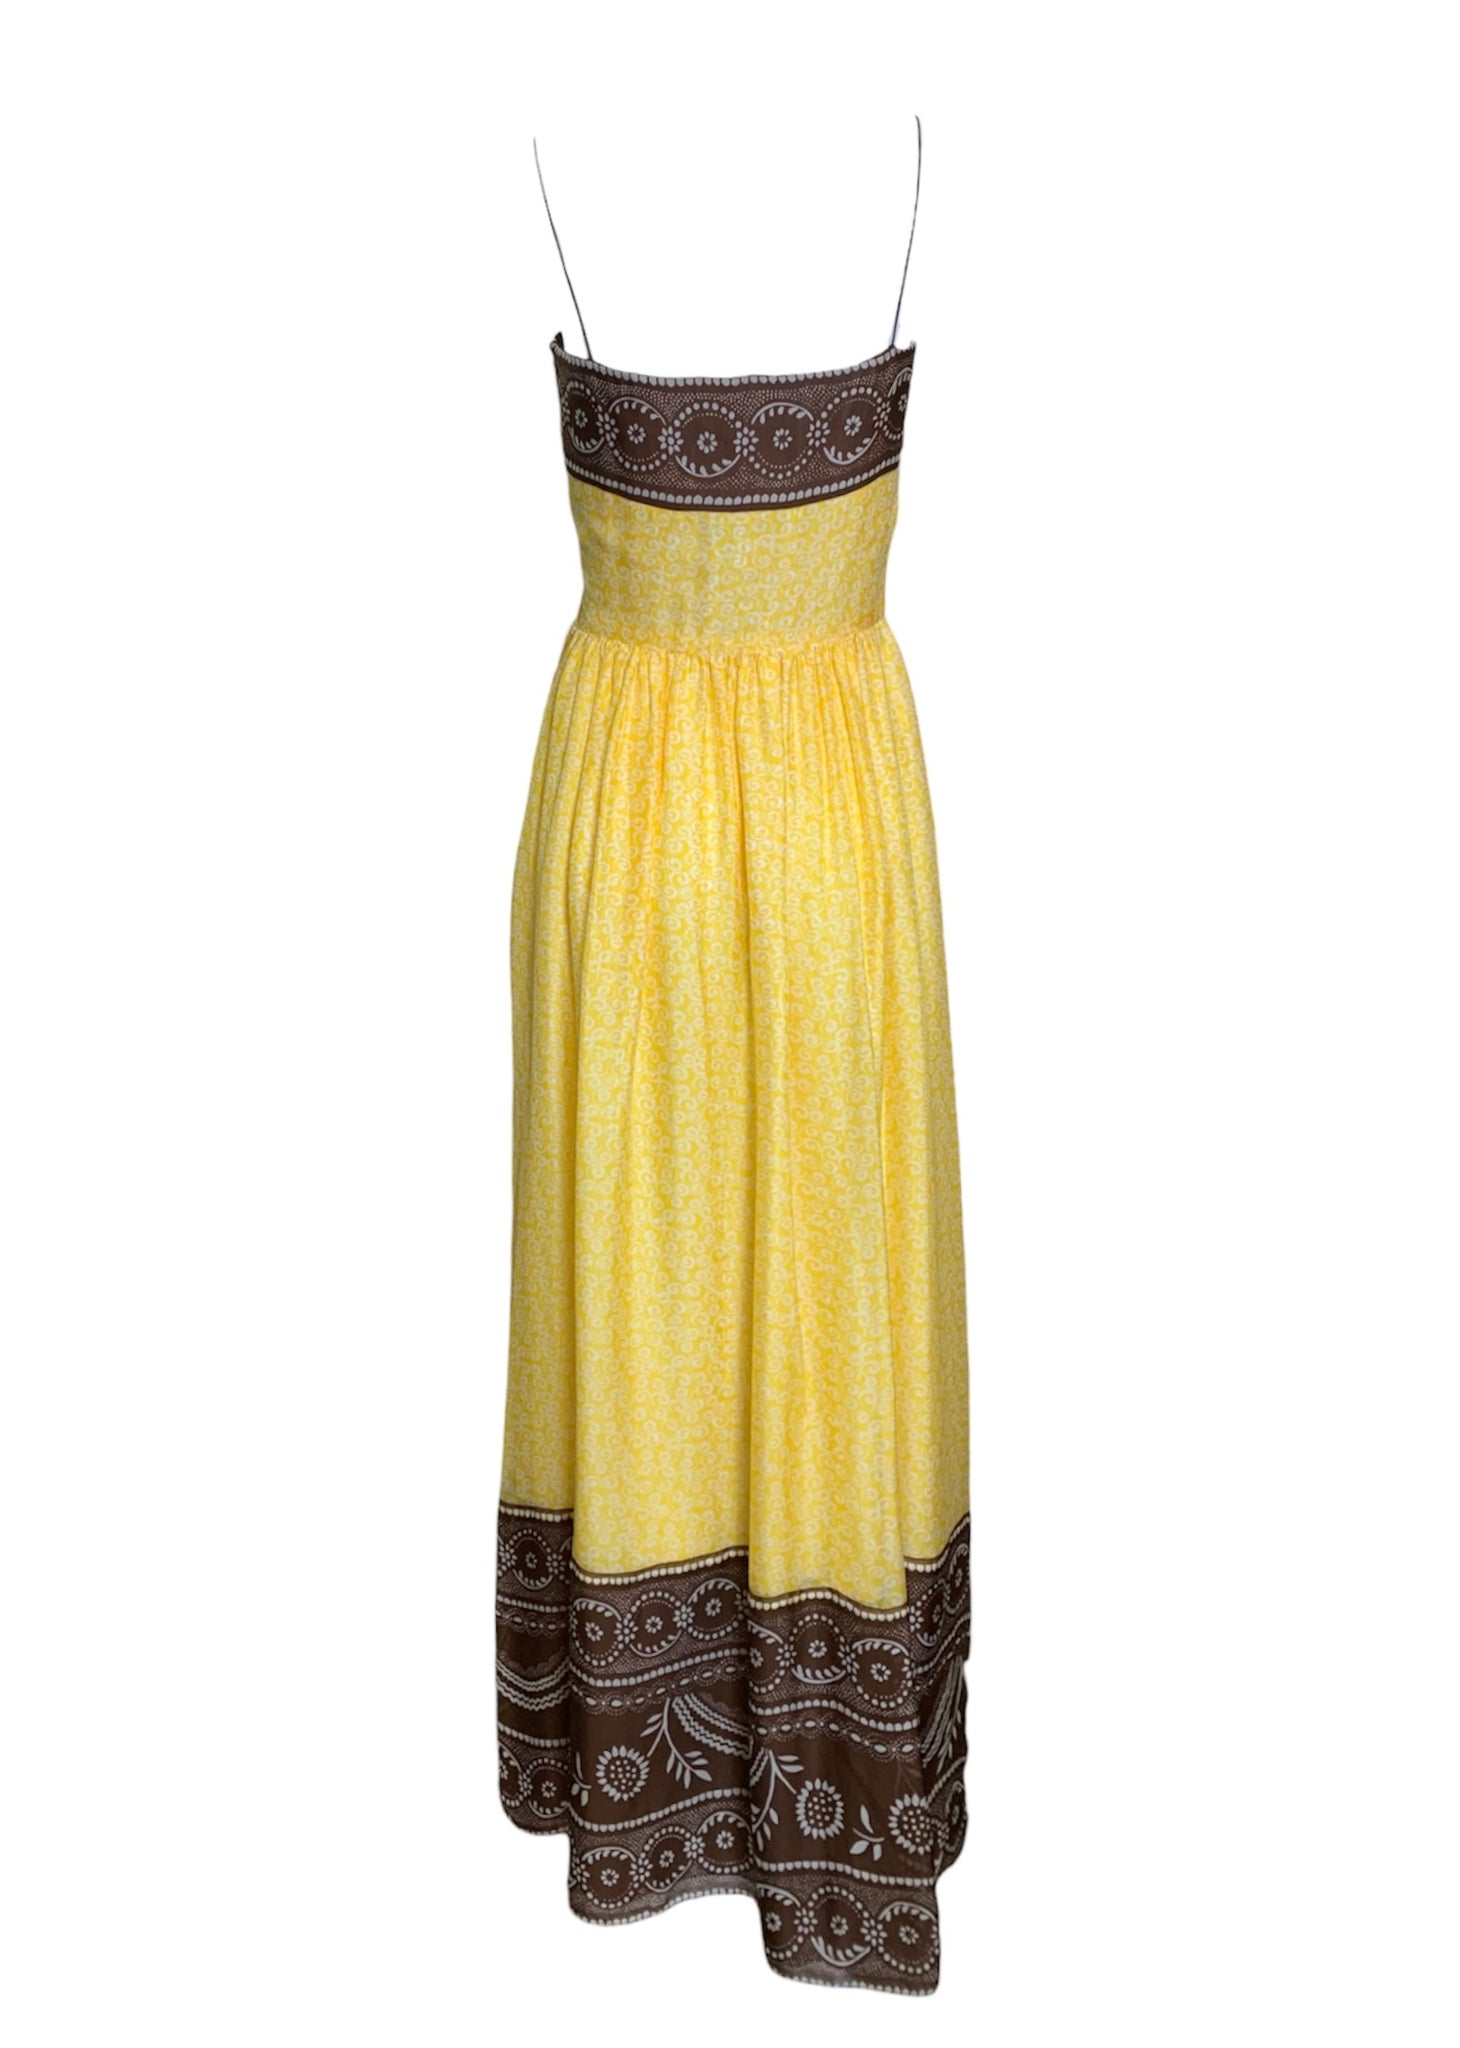  Oscar de la Renta 70s Yellow and White Print Silk Gown with Cocoa Trim BACK 3 of 5